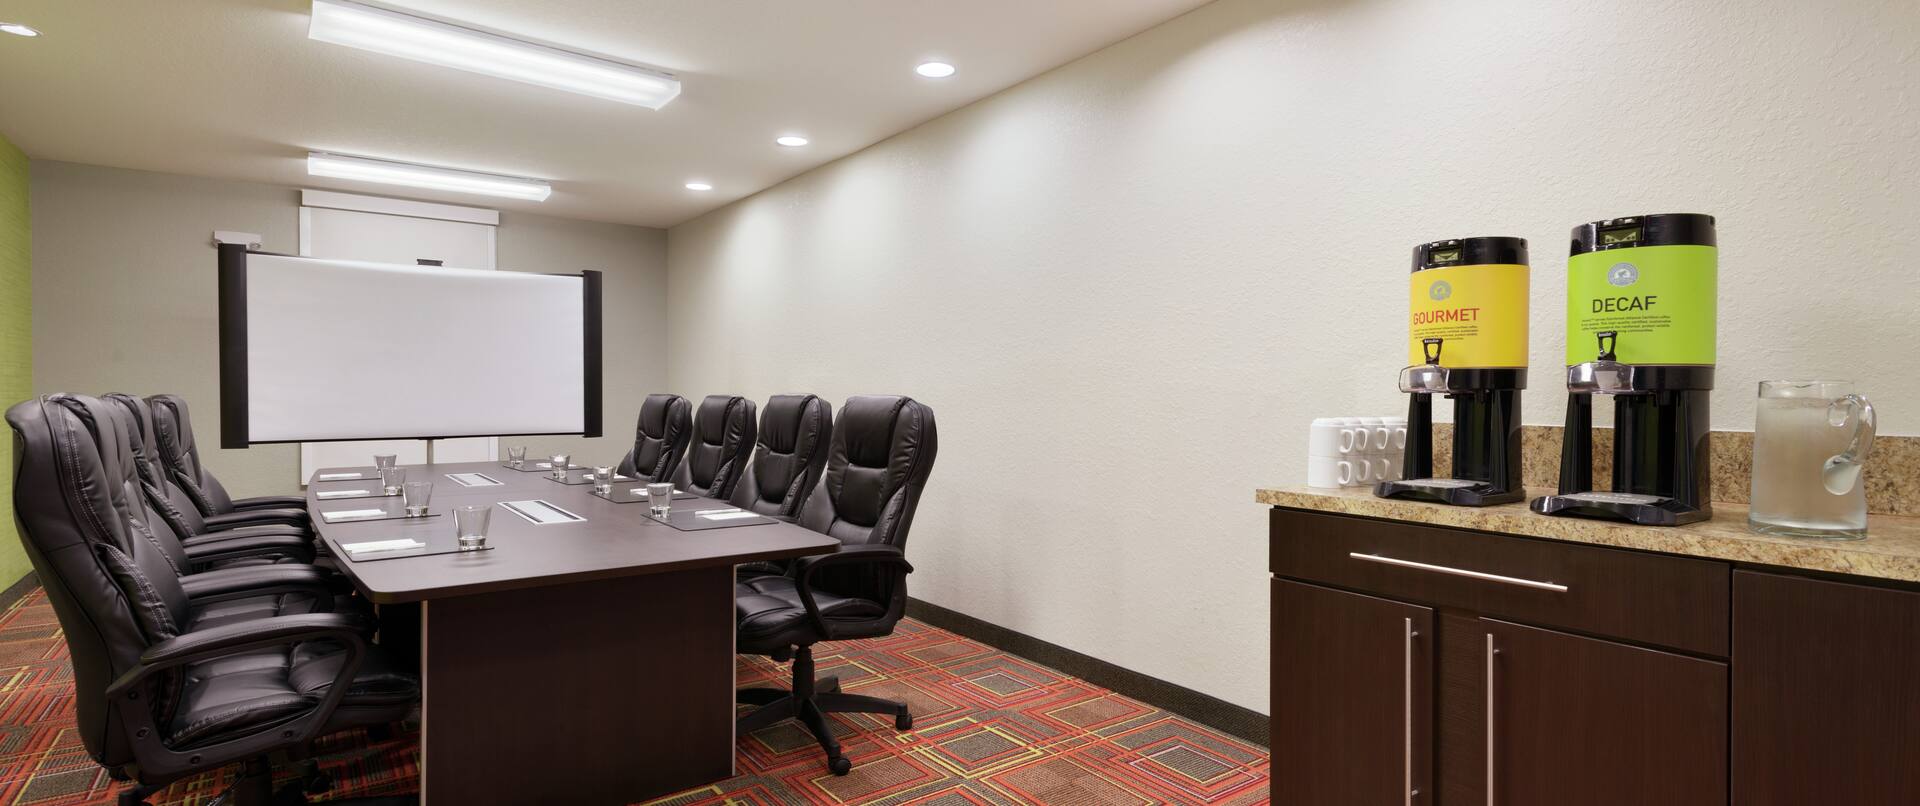 Conference Table, Chairs, and Hot Beverage Station in Meeting Room